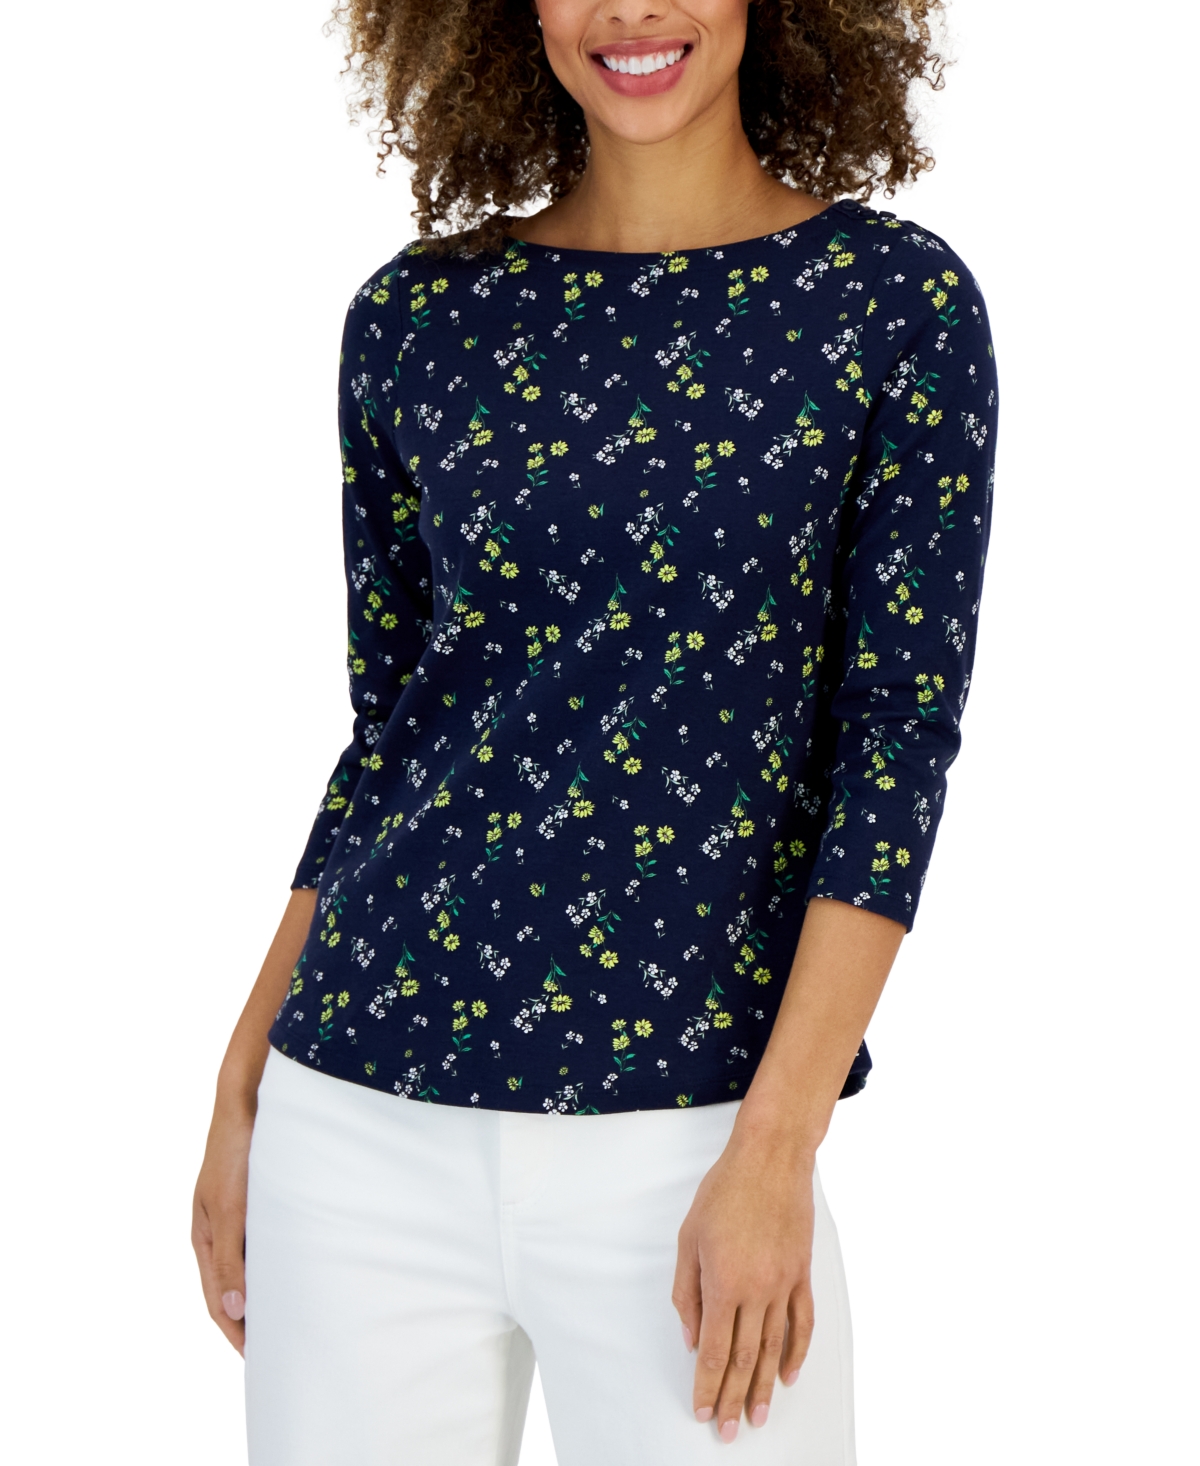 Charter Club Women\'s | Floral Smart Macy\'s for Created Closet Boat-Neck 3/4-Sleeve Top